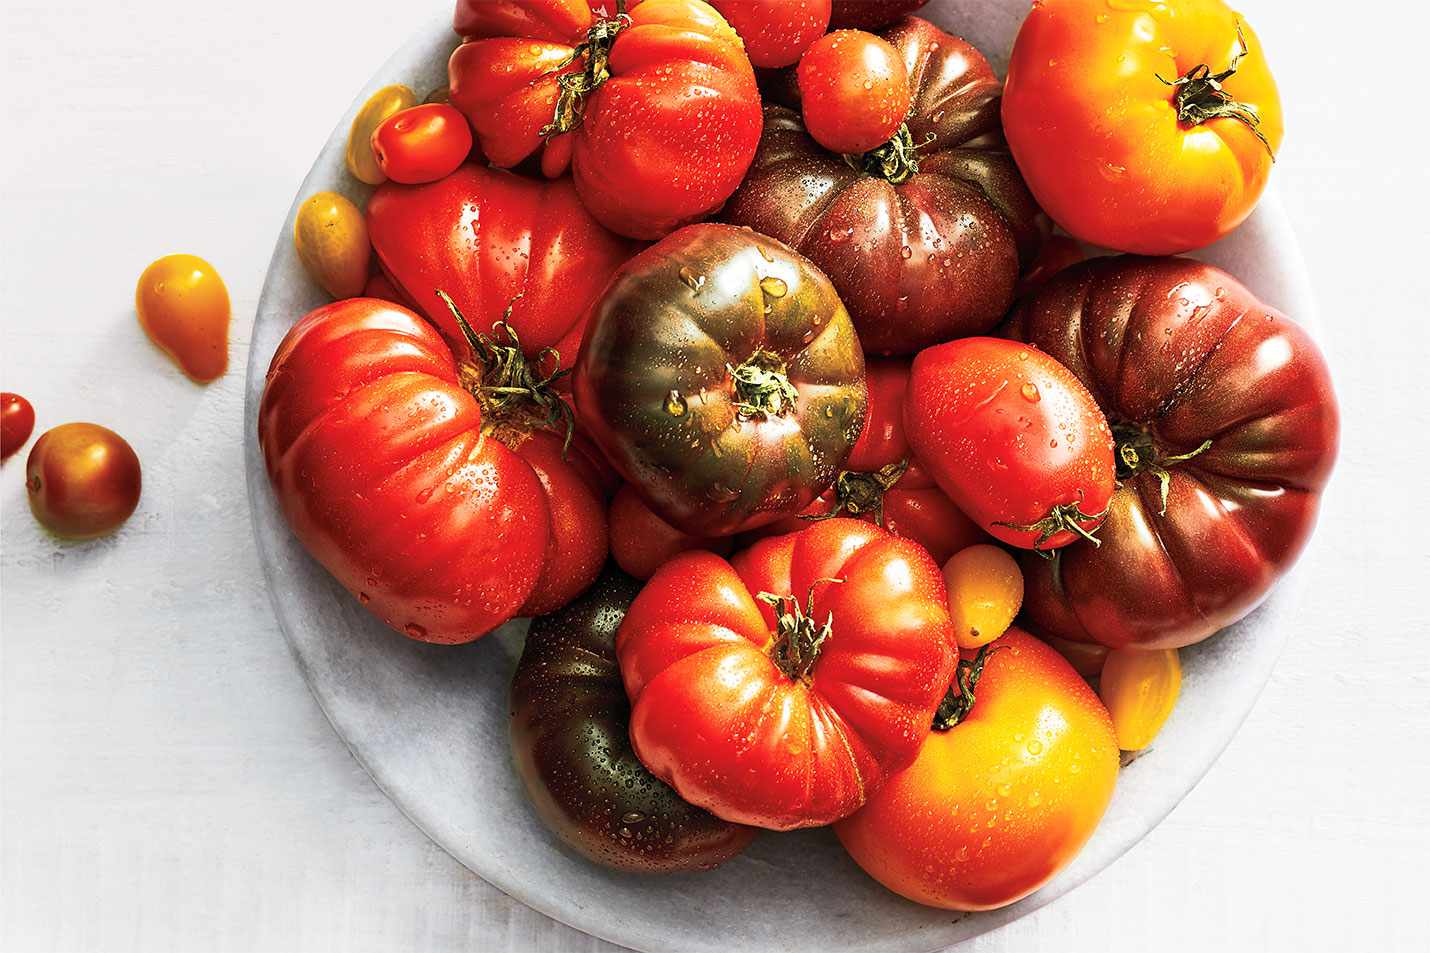 How To Store Heirloom Tomatoes